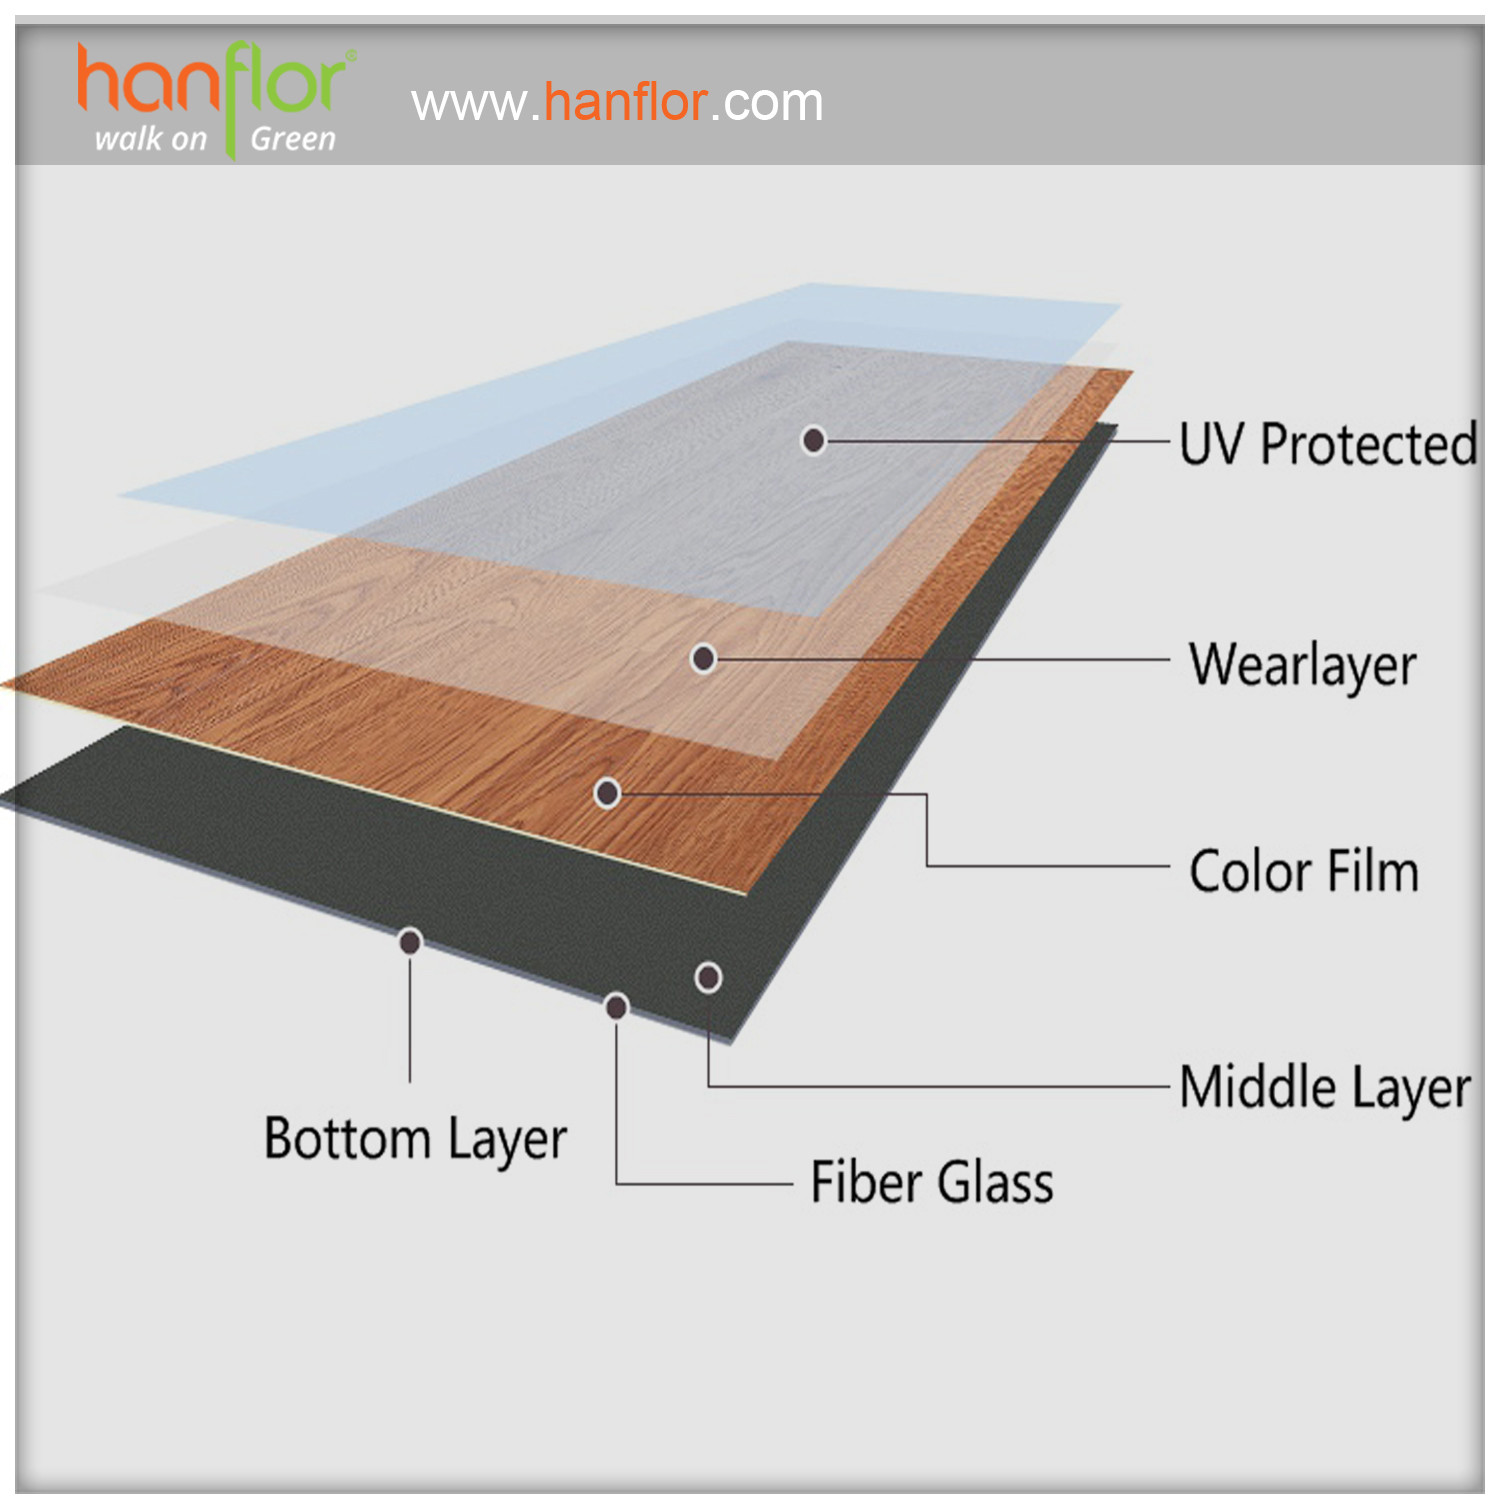 product Structure: UV protected, UV coating, UV, wearlayer, wear layer, wearlayers, color flim, Middle layer, fiber glass, bottom layer, day back, pvc flooring with above structure, make sure the quality is good. plastic floor,pvc floor, Vinyl floor, plastic flooring, pvc flooring, Vinyl flooring, pvc plank, vinyl plank, pvc tile, vinyl tile, click vinyl flooring, interlocking vinyl flooring, unilin click flooring, unilin click vinyl flooring, click pvc flooring, interlocking pvc flooring, unilin click vinyl flooring, unilin click pvc flooring